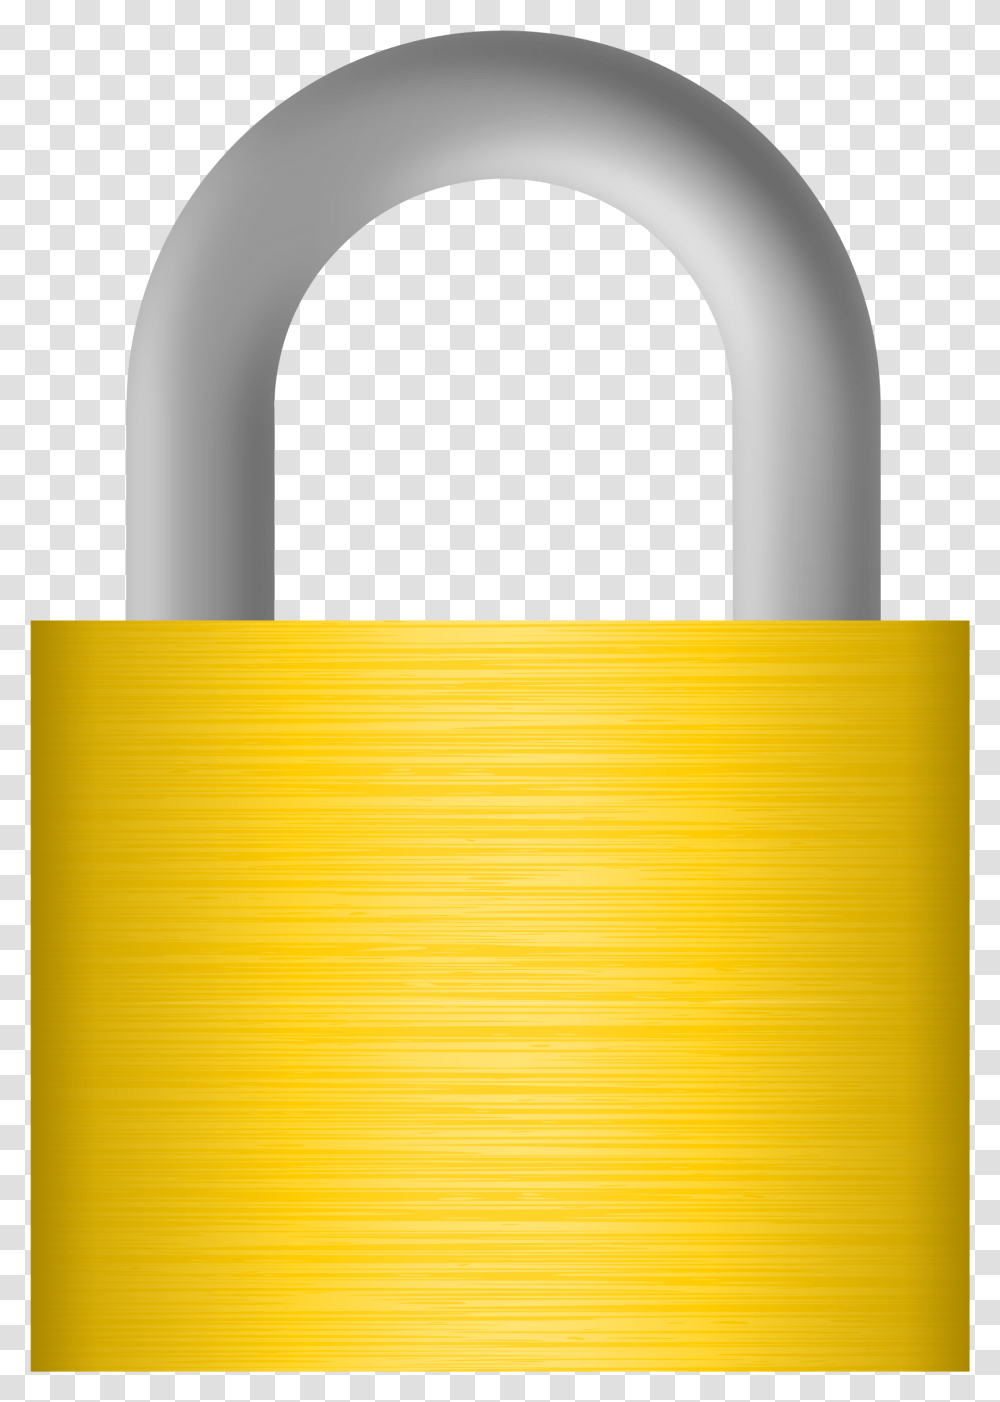 Lock Clipart Vector Clip Art Online Royalty Free Lock Clipart, Security Transparent Png